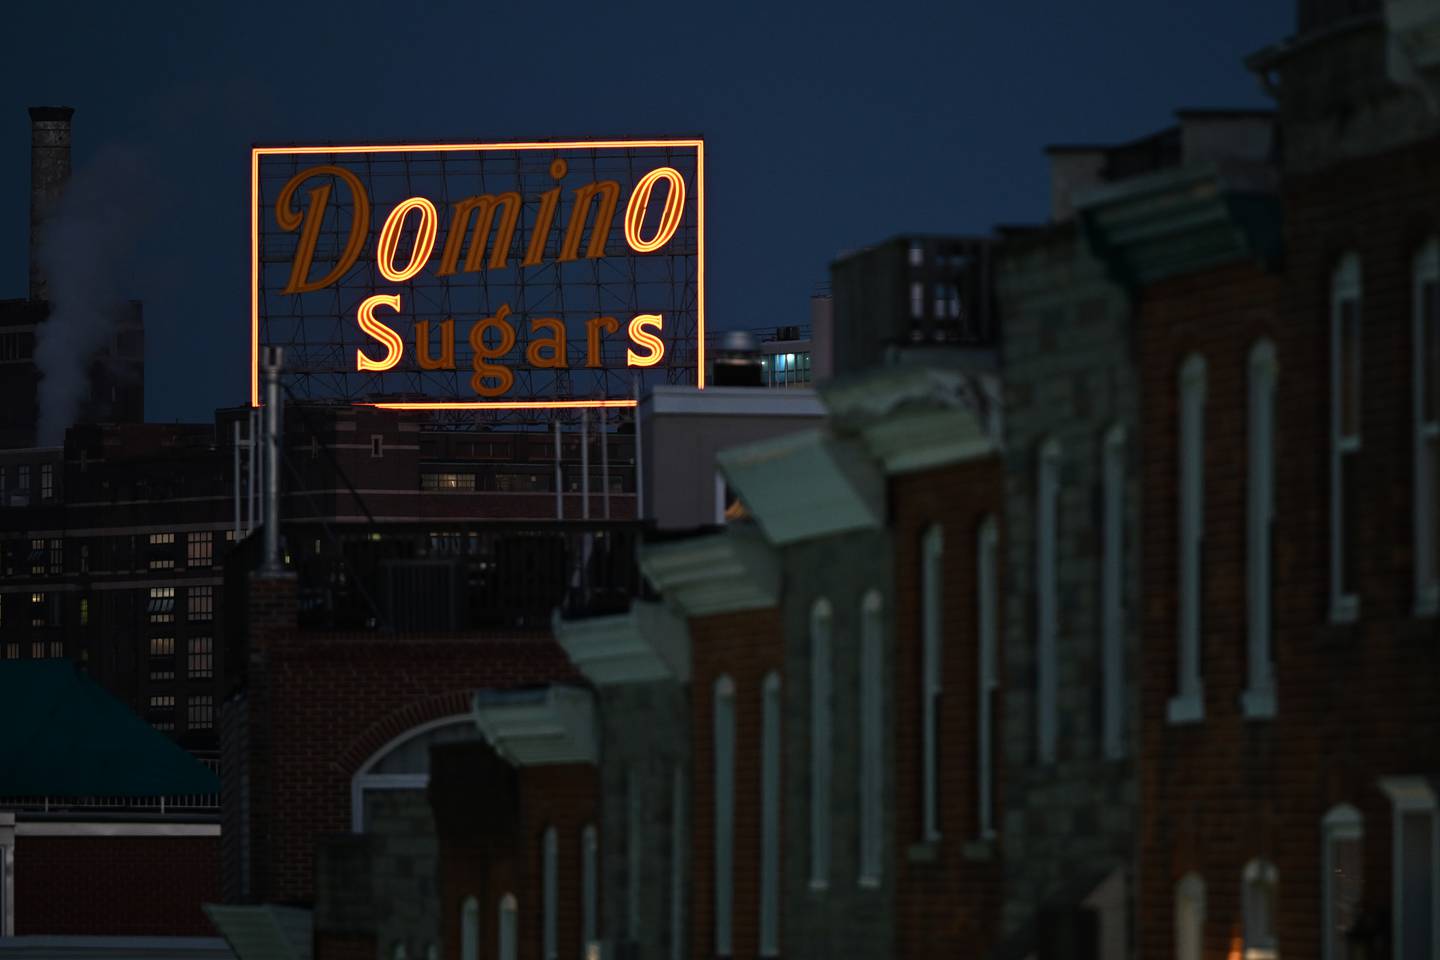 The Domino Sugar sign with only the two letter O's and two S's illuminated.